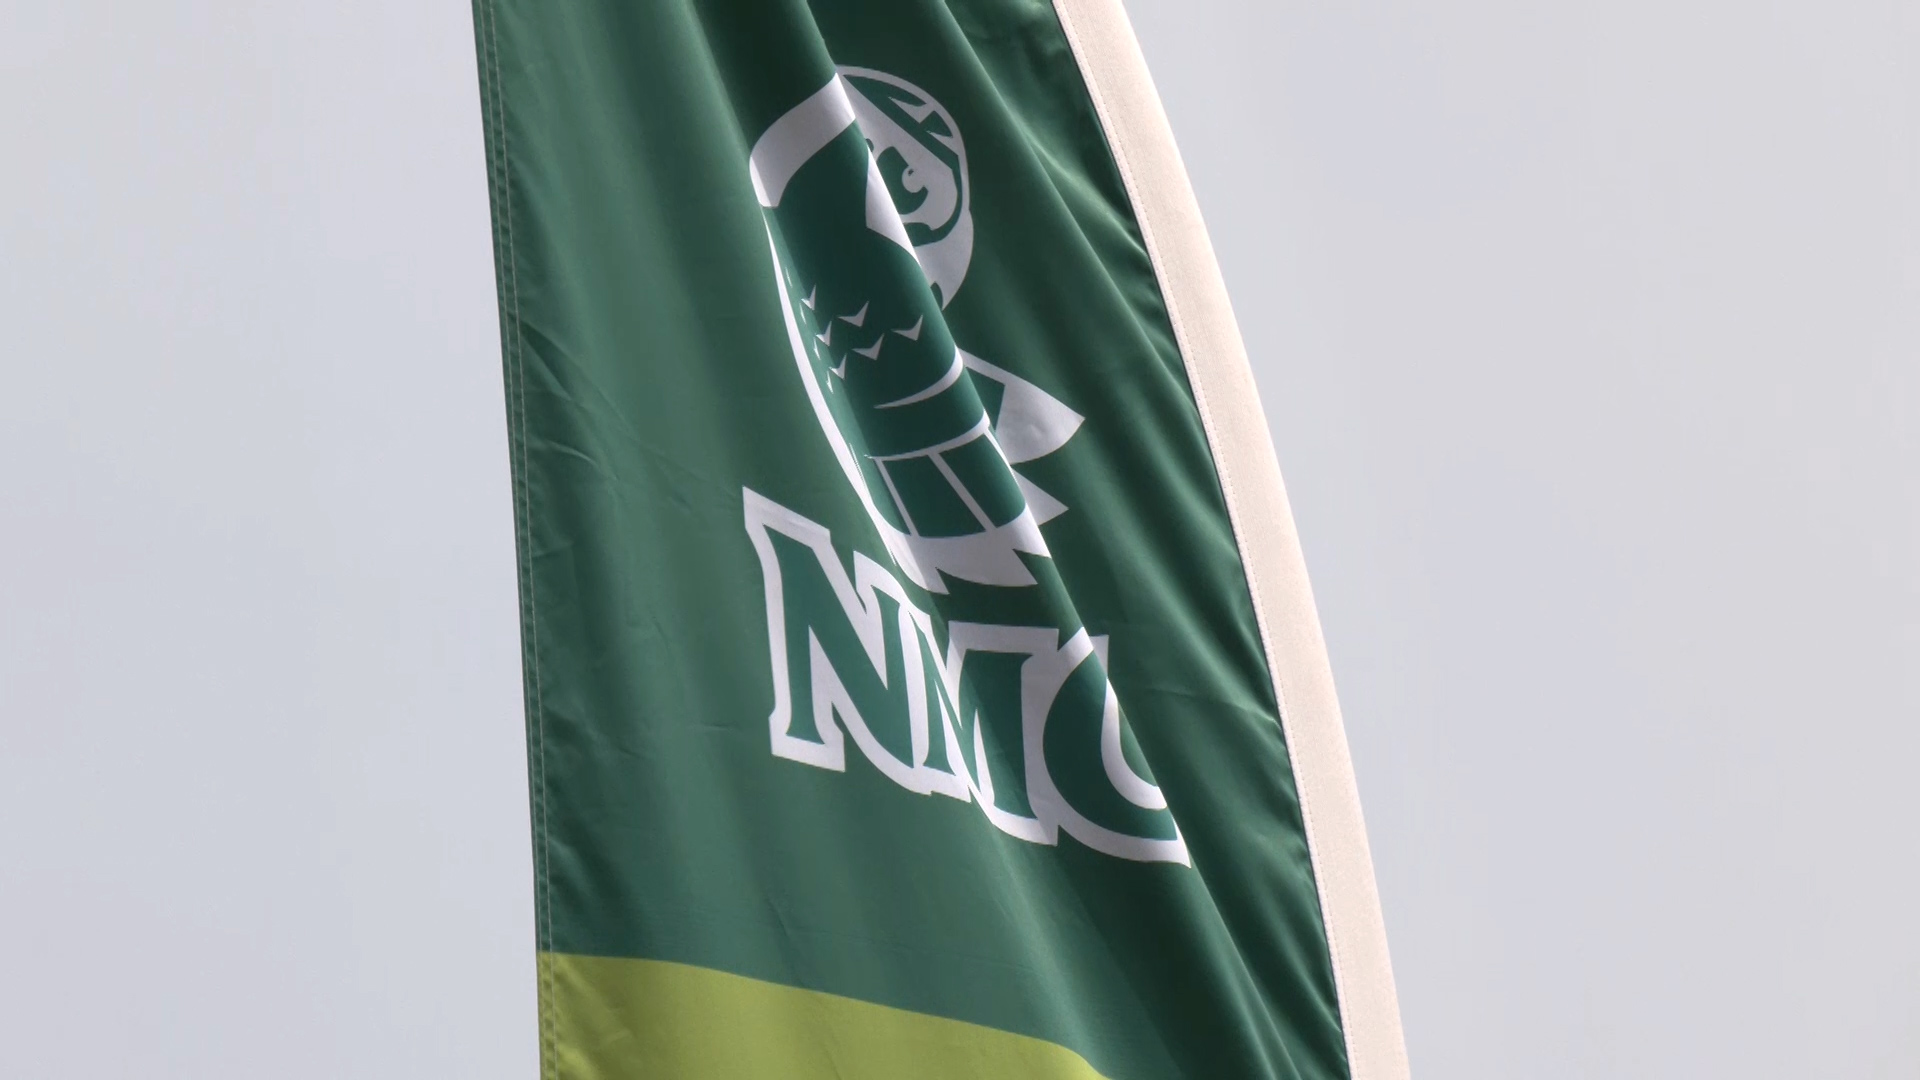 Voters will decide if Northwestern Michigan College expands to Benzie Co.